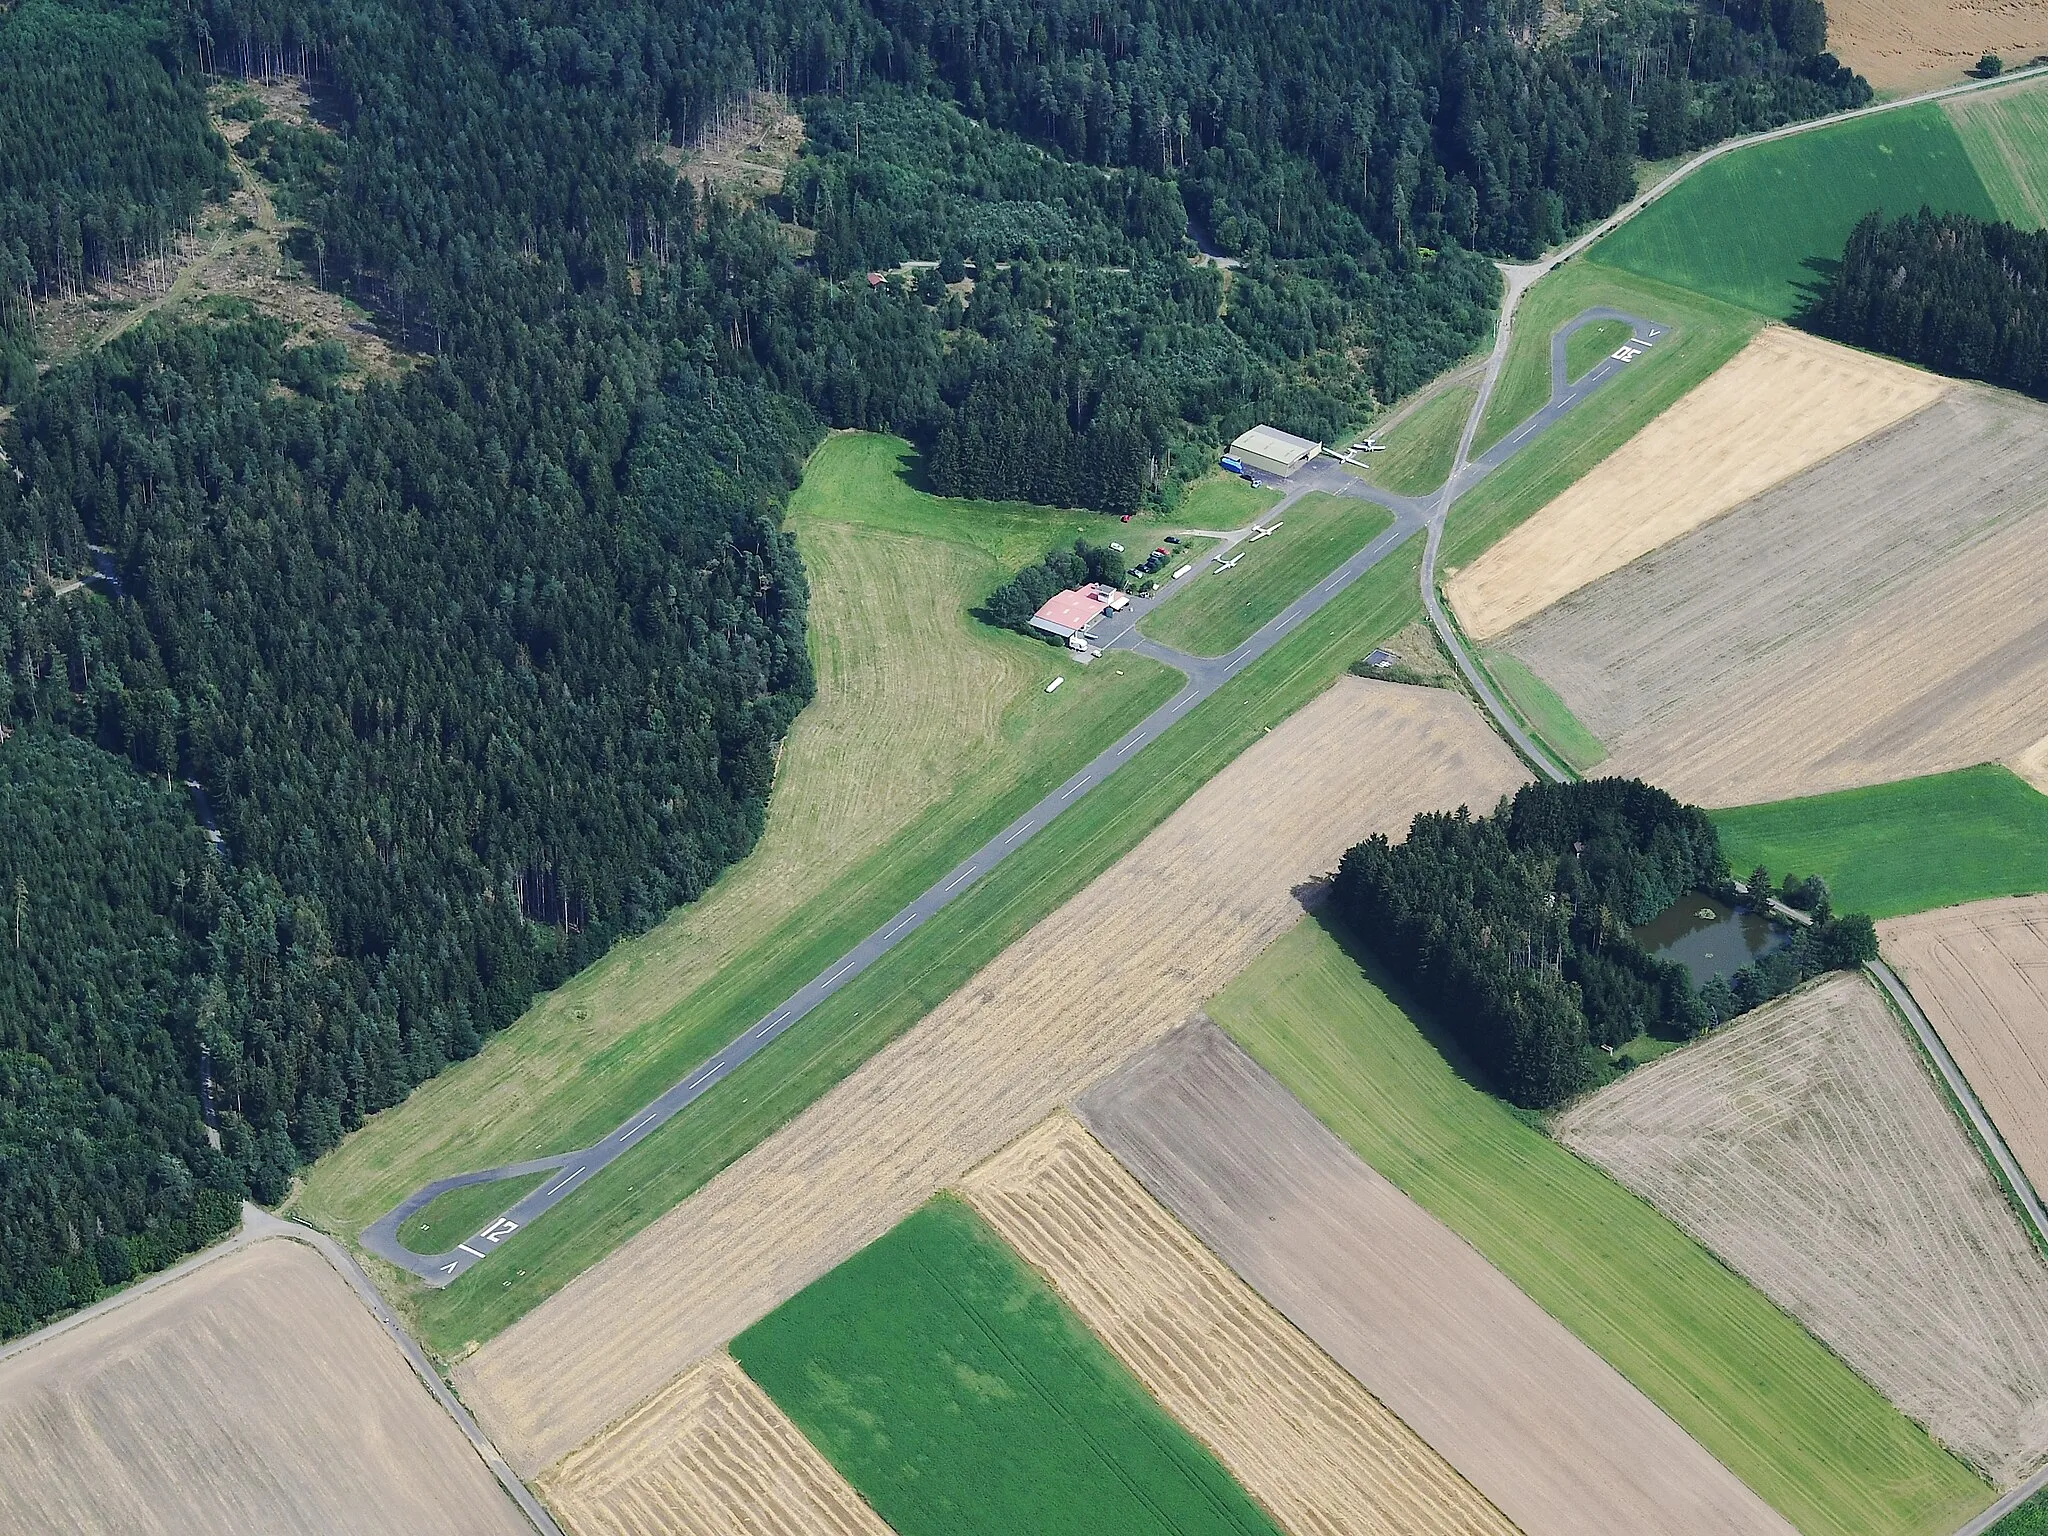 Photo showing: Aerial image of the Erbendorf-Schweißlohe gliding site